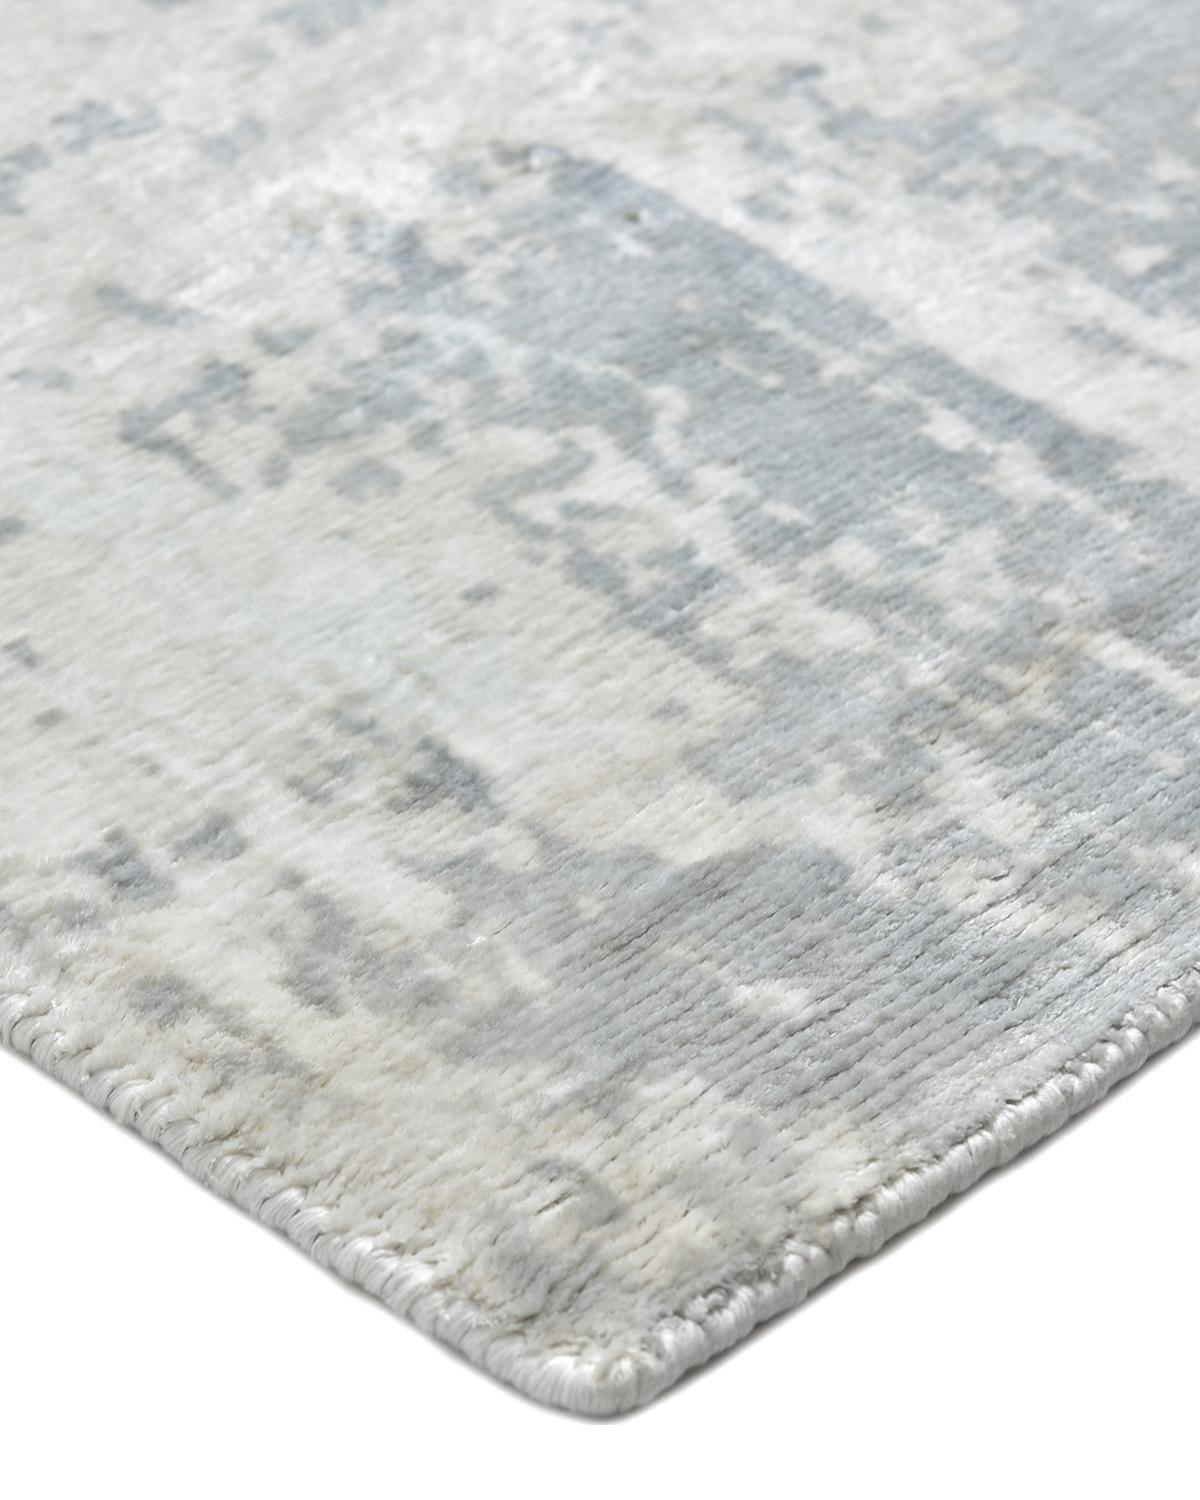 With their freeform motifs and sophisticated color play, the rugs in the Abstract collection imbue a room with a fresh, dynamic spirit. They also bring an imprimatur of timeless luxury, thanks to the artisans who handcraft them using the